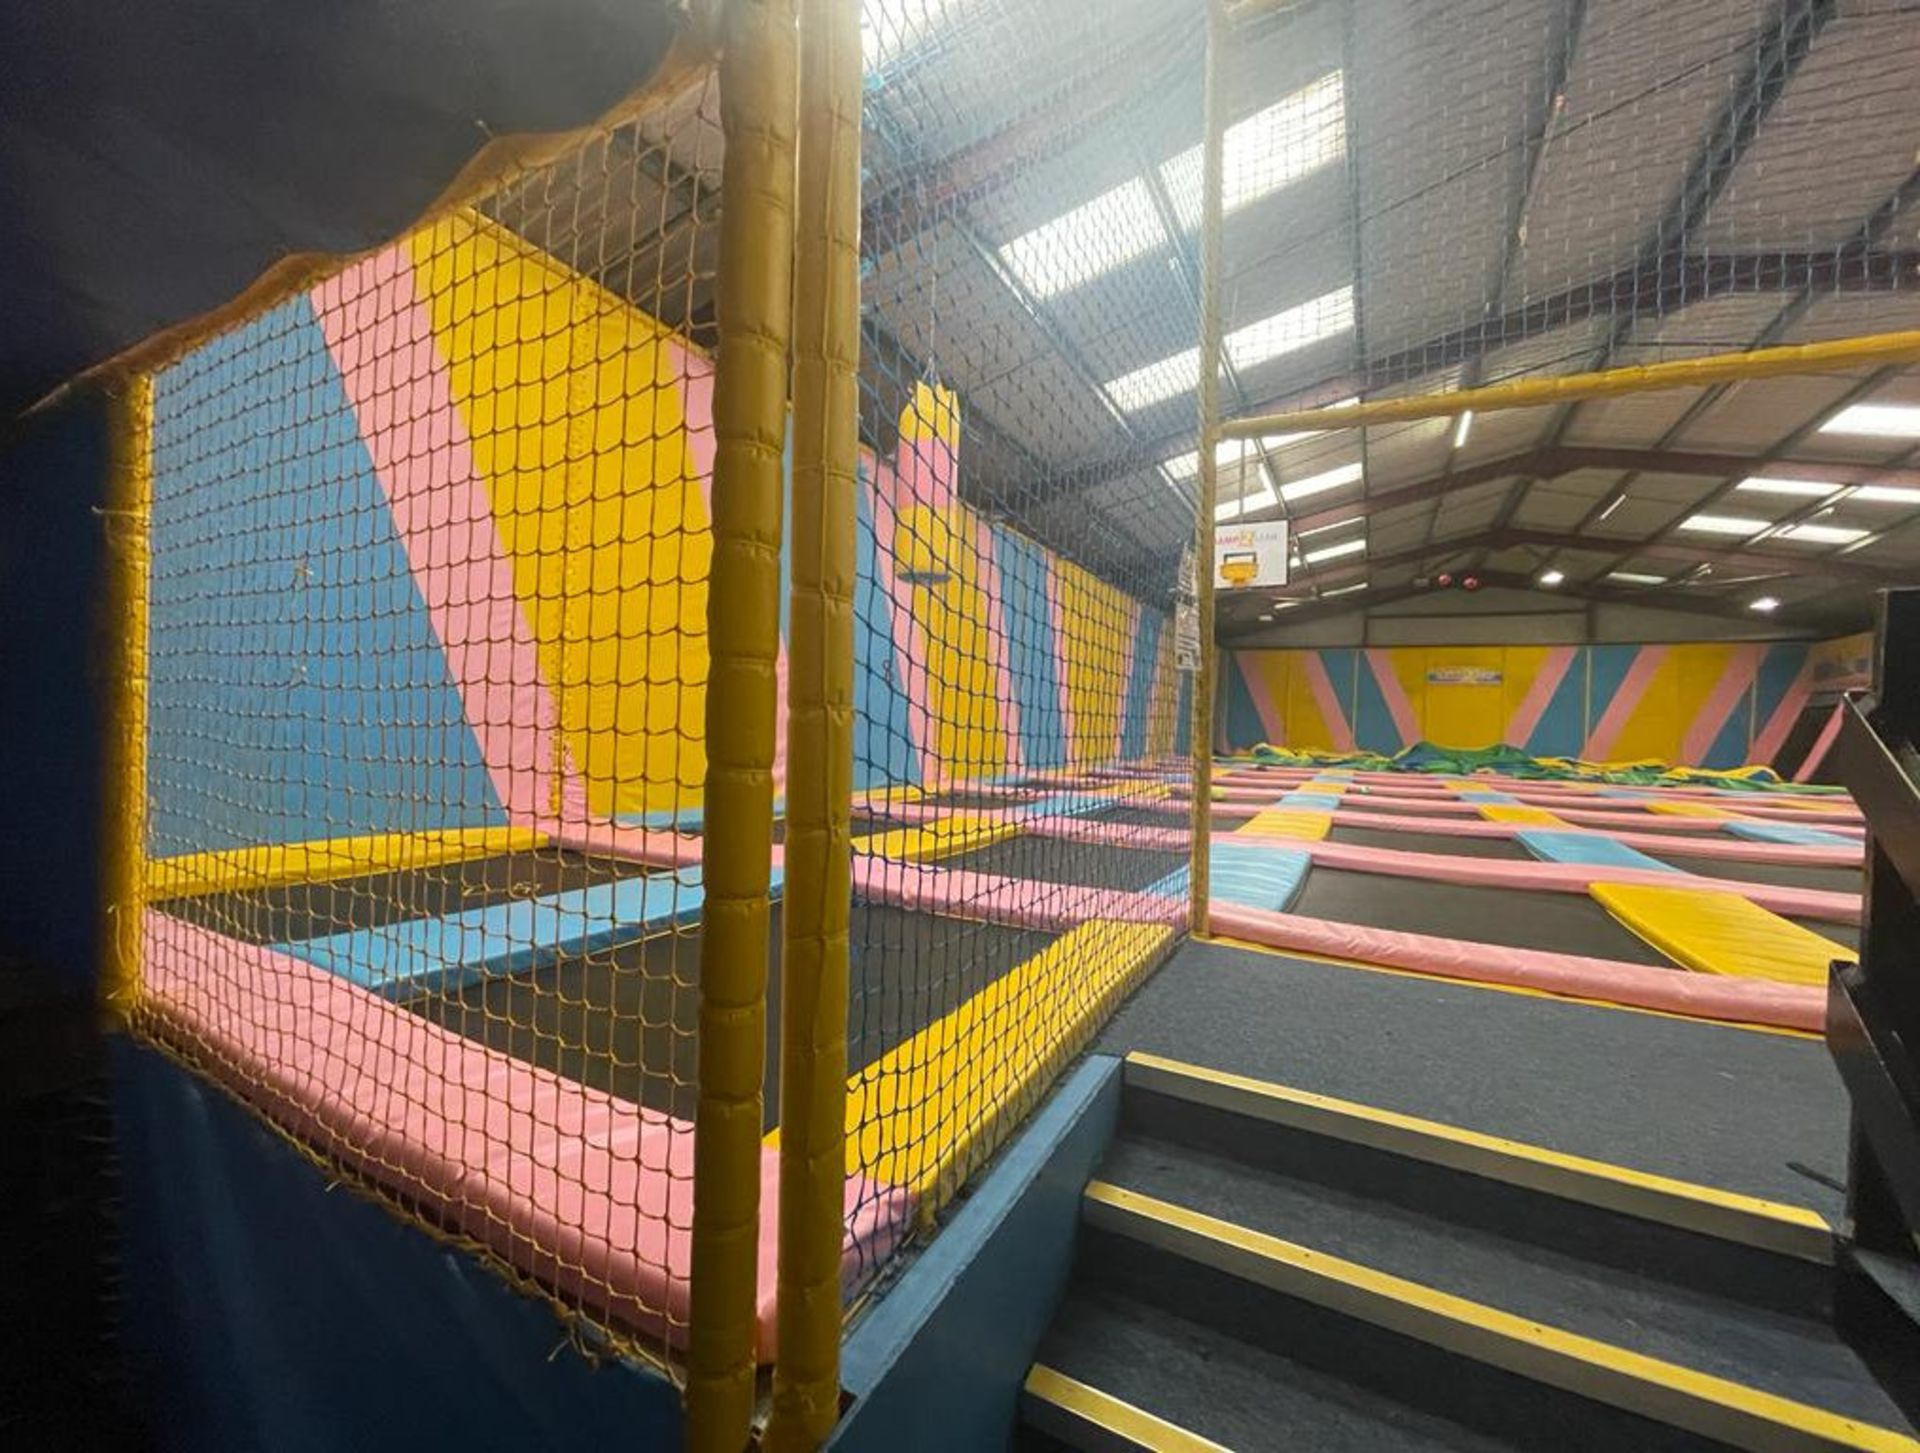 1 x Trampoline Park With Over 40 Interconnected Trampolines, Inflatable Activity Area, Waiting - Image 28 of 99